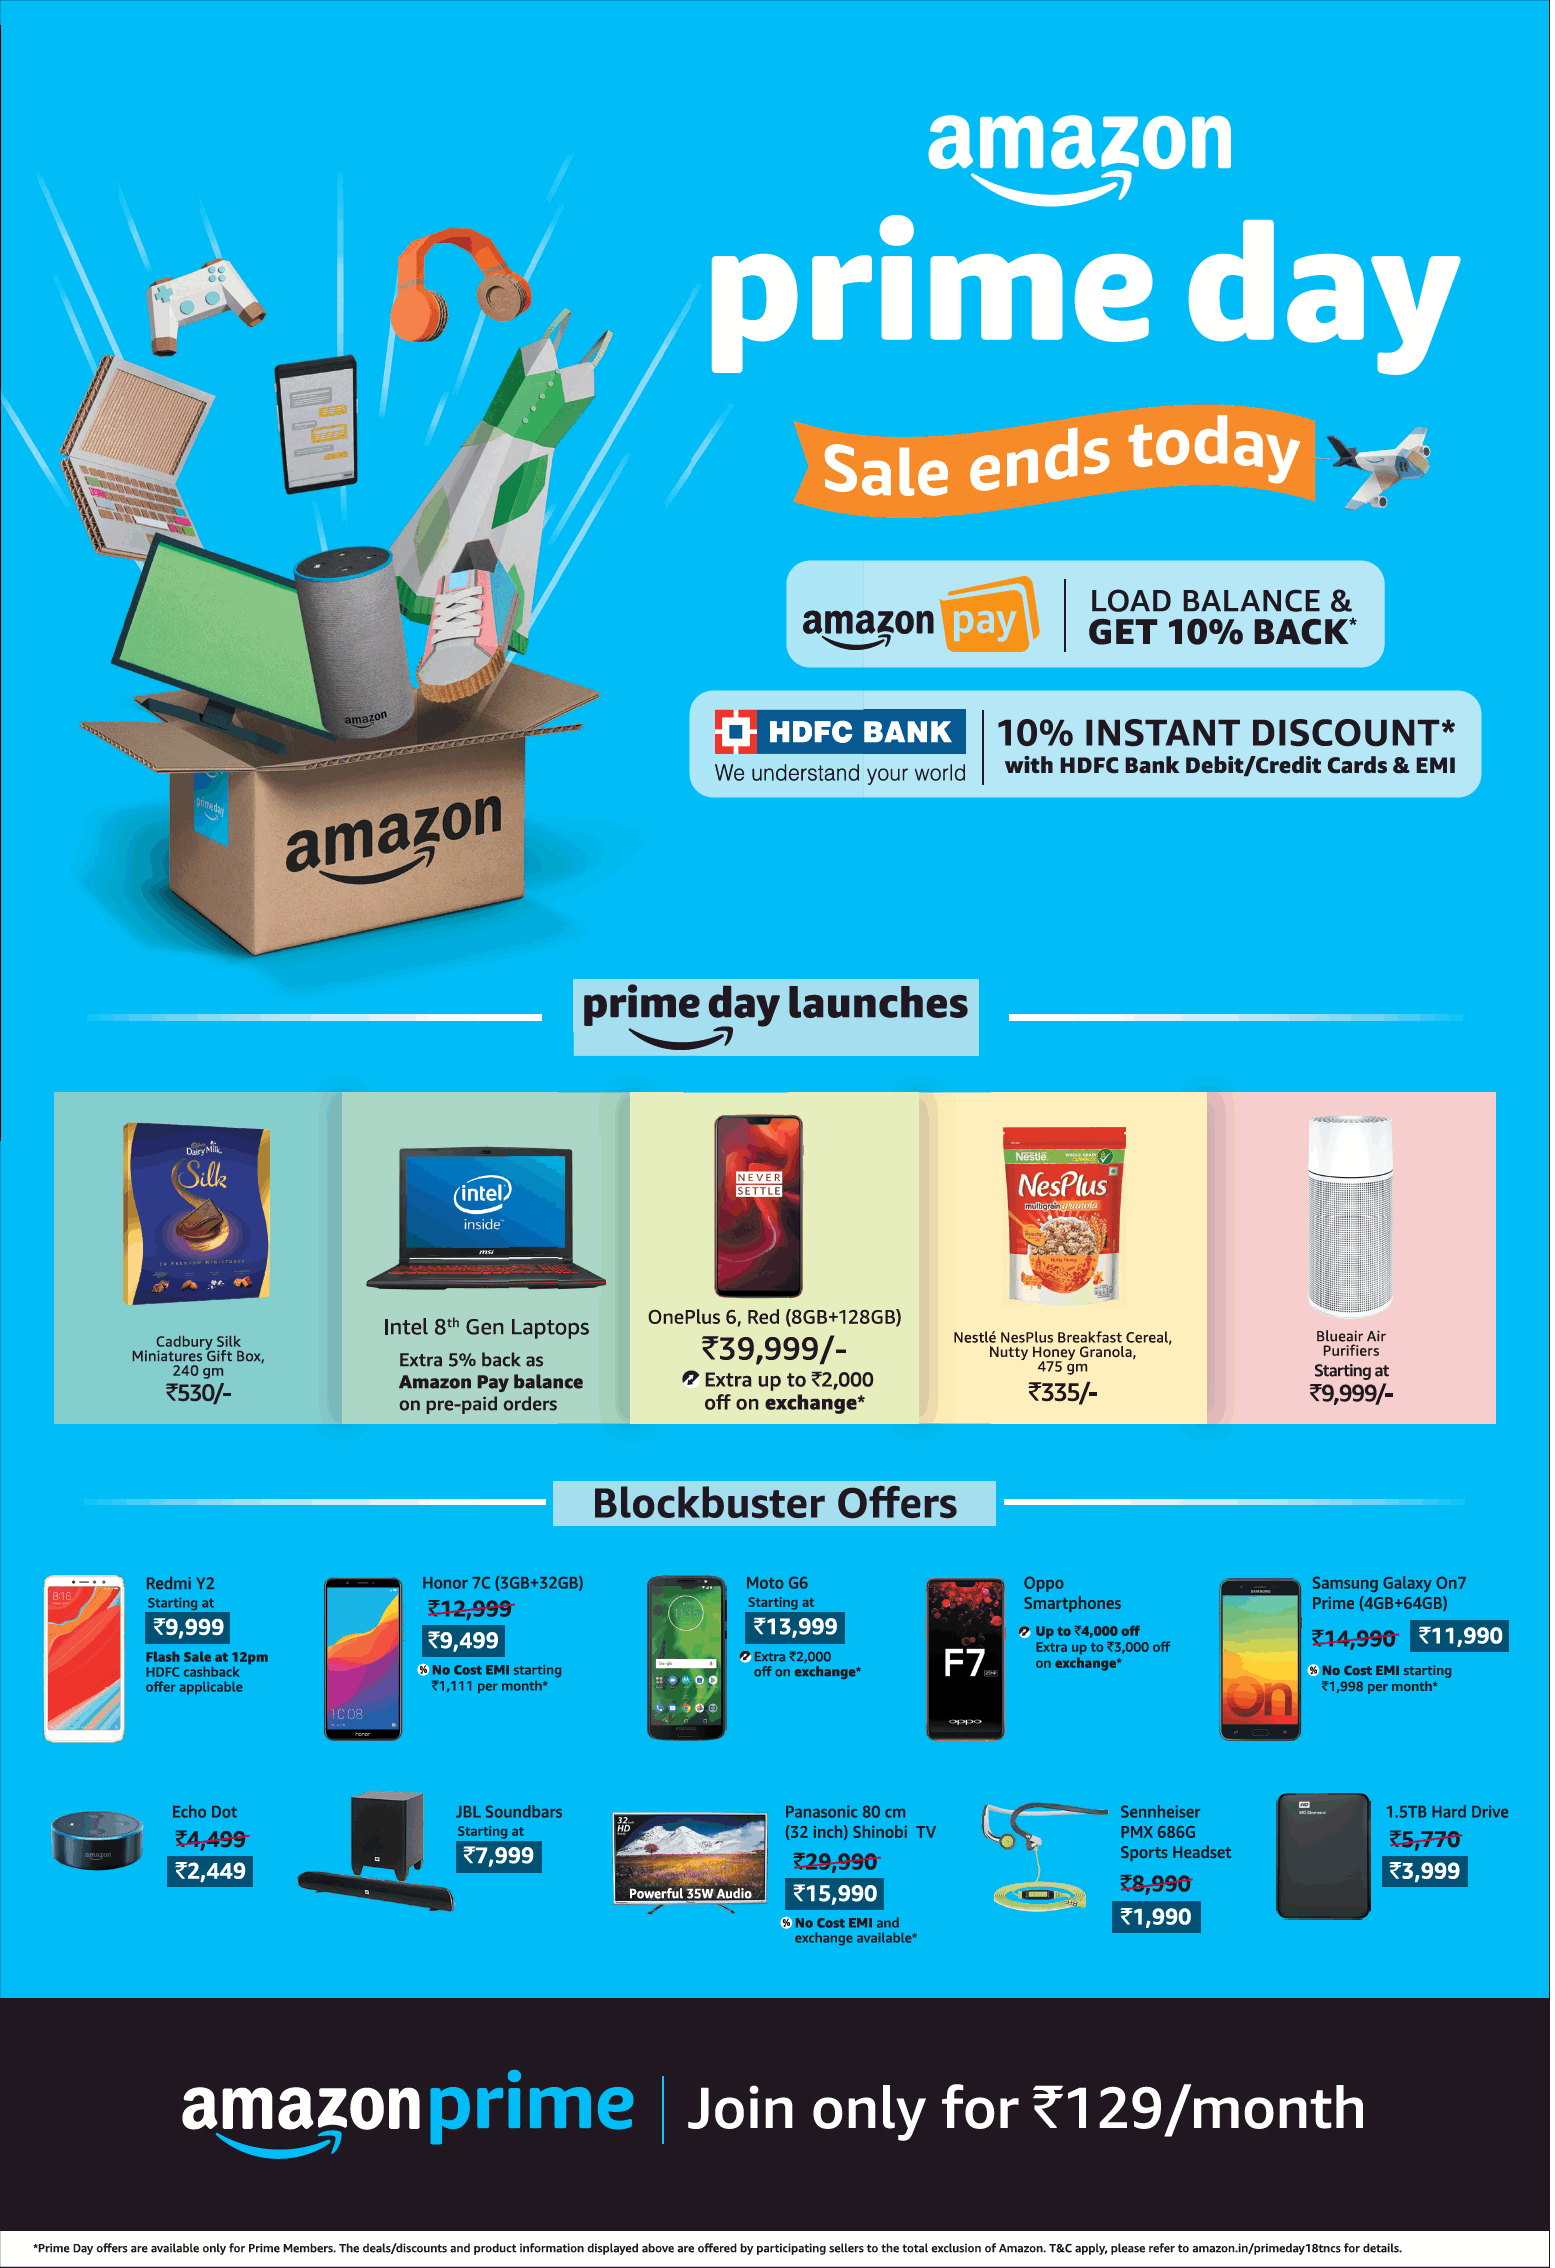 https://newspaperads.ads2publish.com/wp-content/uploads/2018/07/amazon-prime-day-sale-ends-today-load-balance-and-get-10-cashback-ad-times-of-india-mumbai-17-07-2018.png